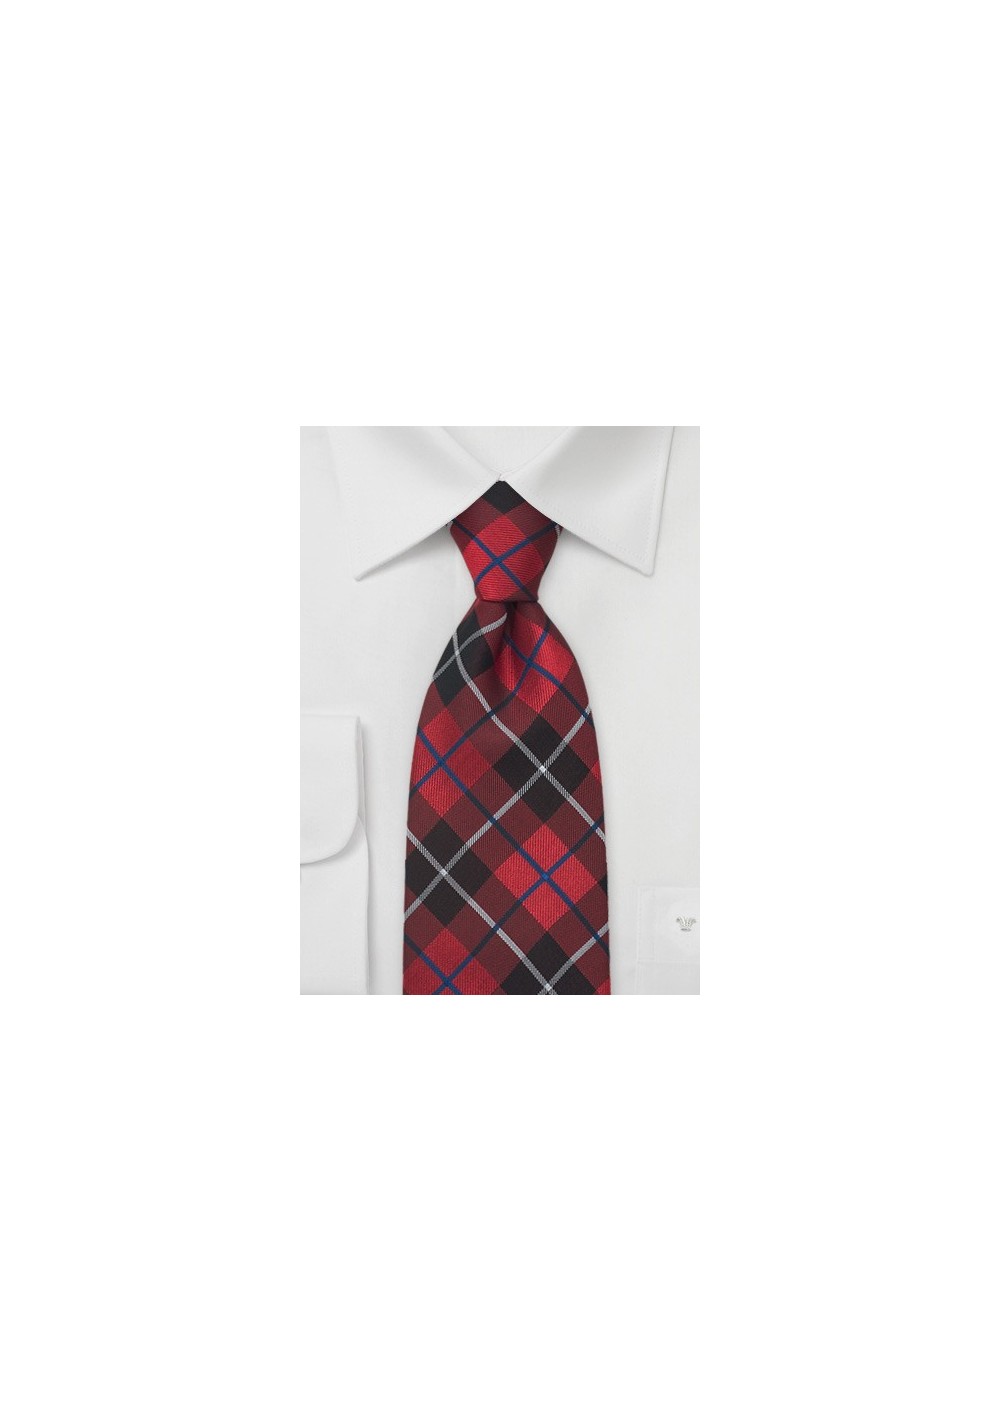 Traditional Tartan-Check Pattern Tie for Kids